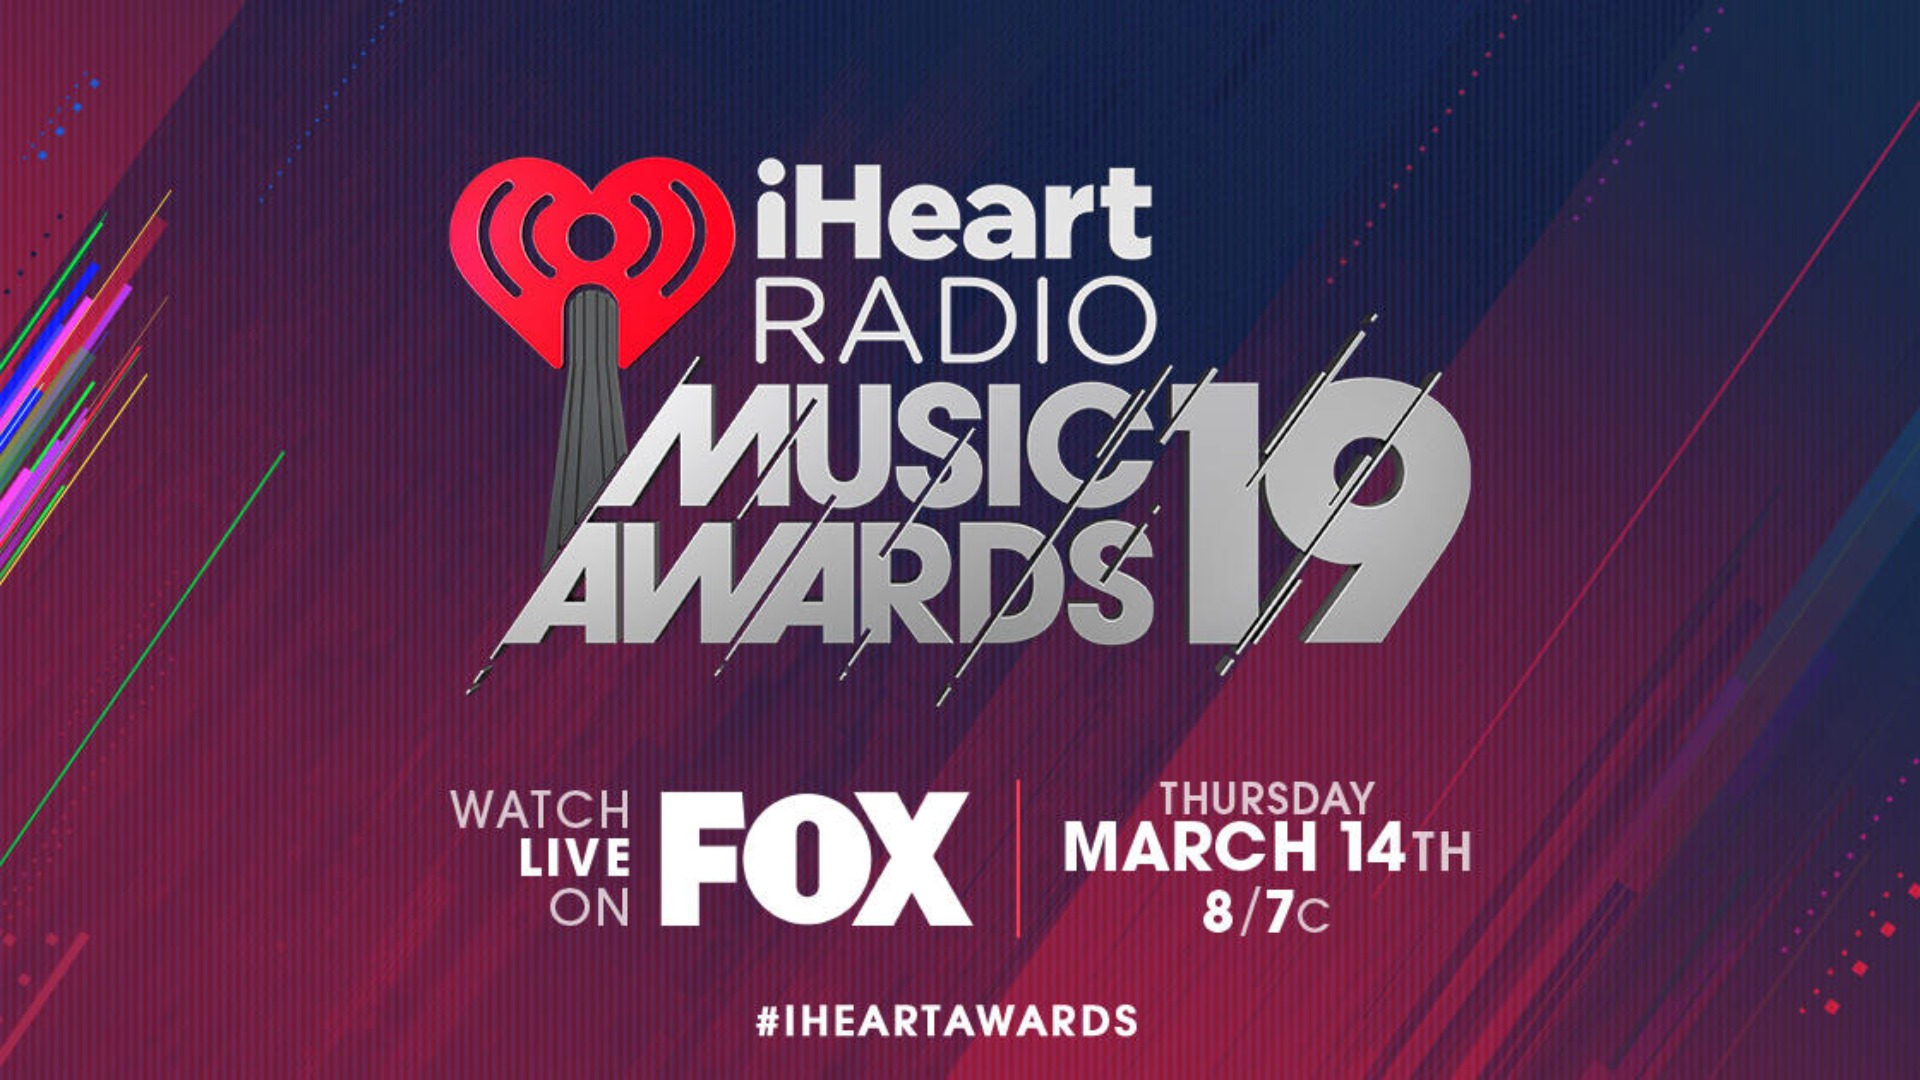 The iHeartRadio Music Awards is a music awards show that celebrates music heard throughout the year across iHeartMedia radio stations nationwide and on iHeartRadio, iHeartMedia's digital music platform.[2] Founded by iHeartRadio in 2014, the event recognizes the most popular artists and music over the past year. Winners are chosen per cumulative performance data, while the public is able to vote in several categories.[3] The inaugural event was held on May 1, 2014 at the Shrine Auditorium in Los Angeles. Its first two years were broadcast live on NBC, from 2016 to 2018 it was simulcast on TBS, TNT and truTV.[4][5][6] The sixth annual iHeartRadio Music Awards will be held on March 14, 2019 at the Microsoft Theater, Los Angeles and broadcast live on Fox. The trophy is manufactured by the New York firm Society Awards.Wikipedia